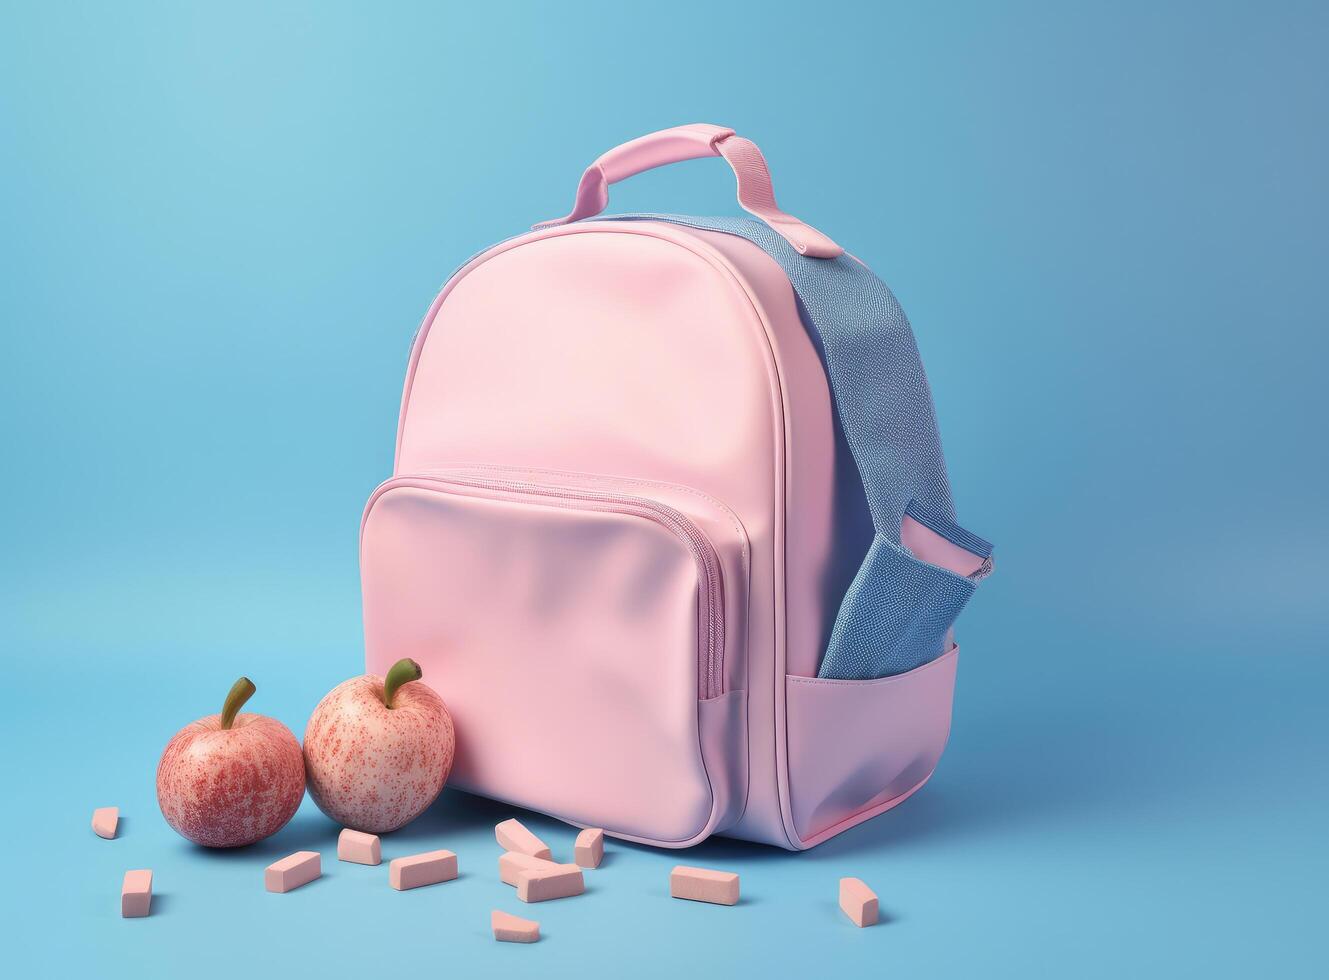 Kids Lunch Bag Stock Photos, Images and Backgrounds for Free Download